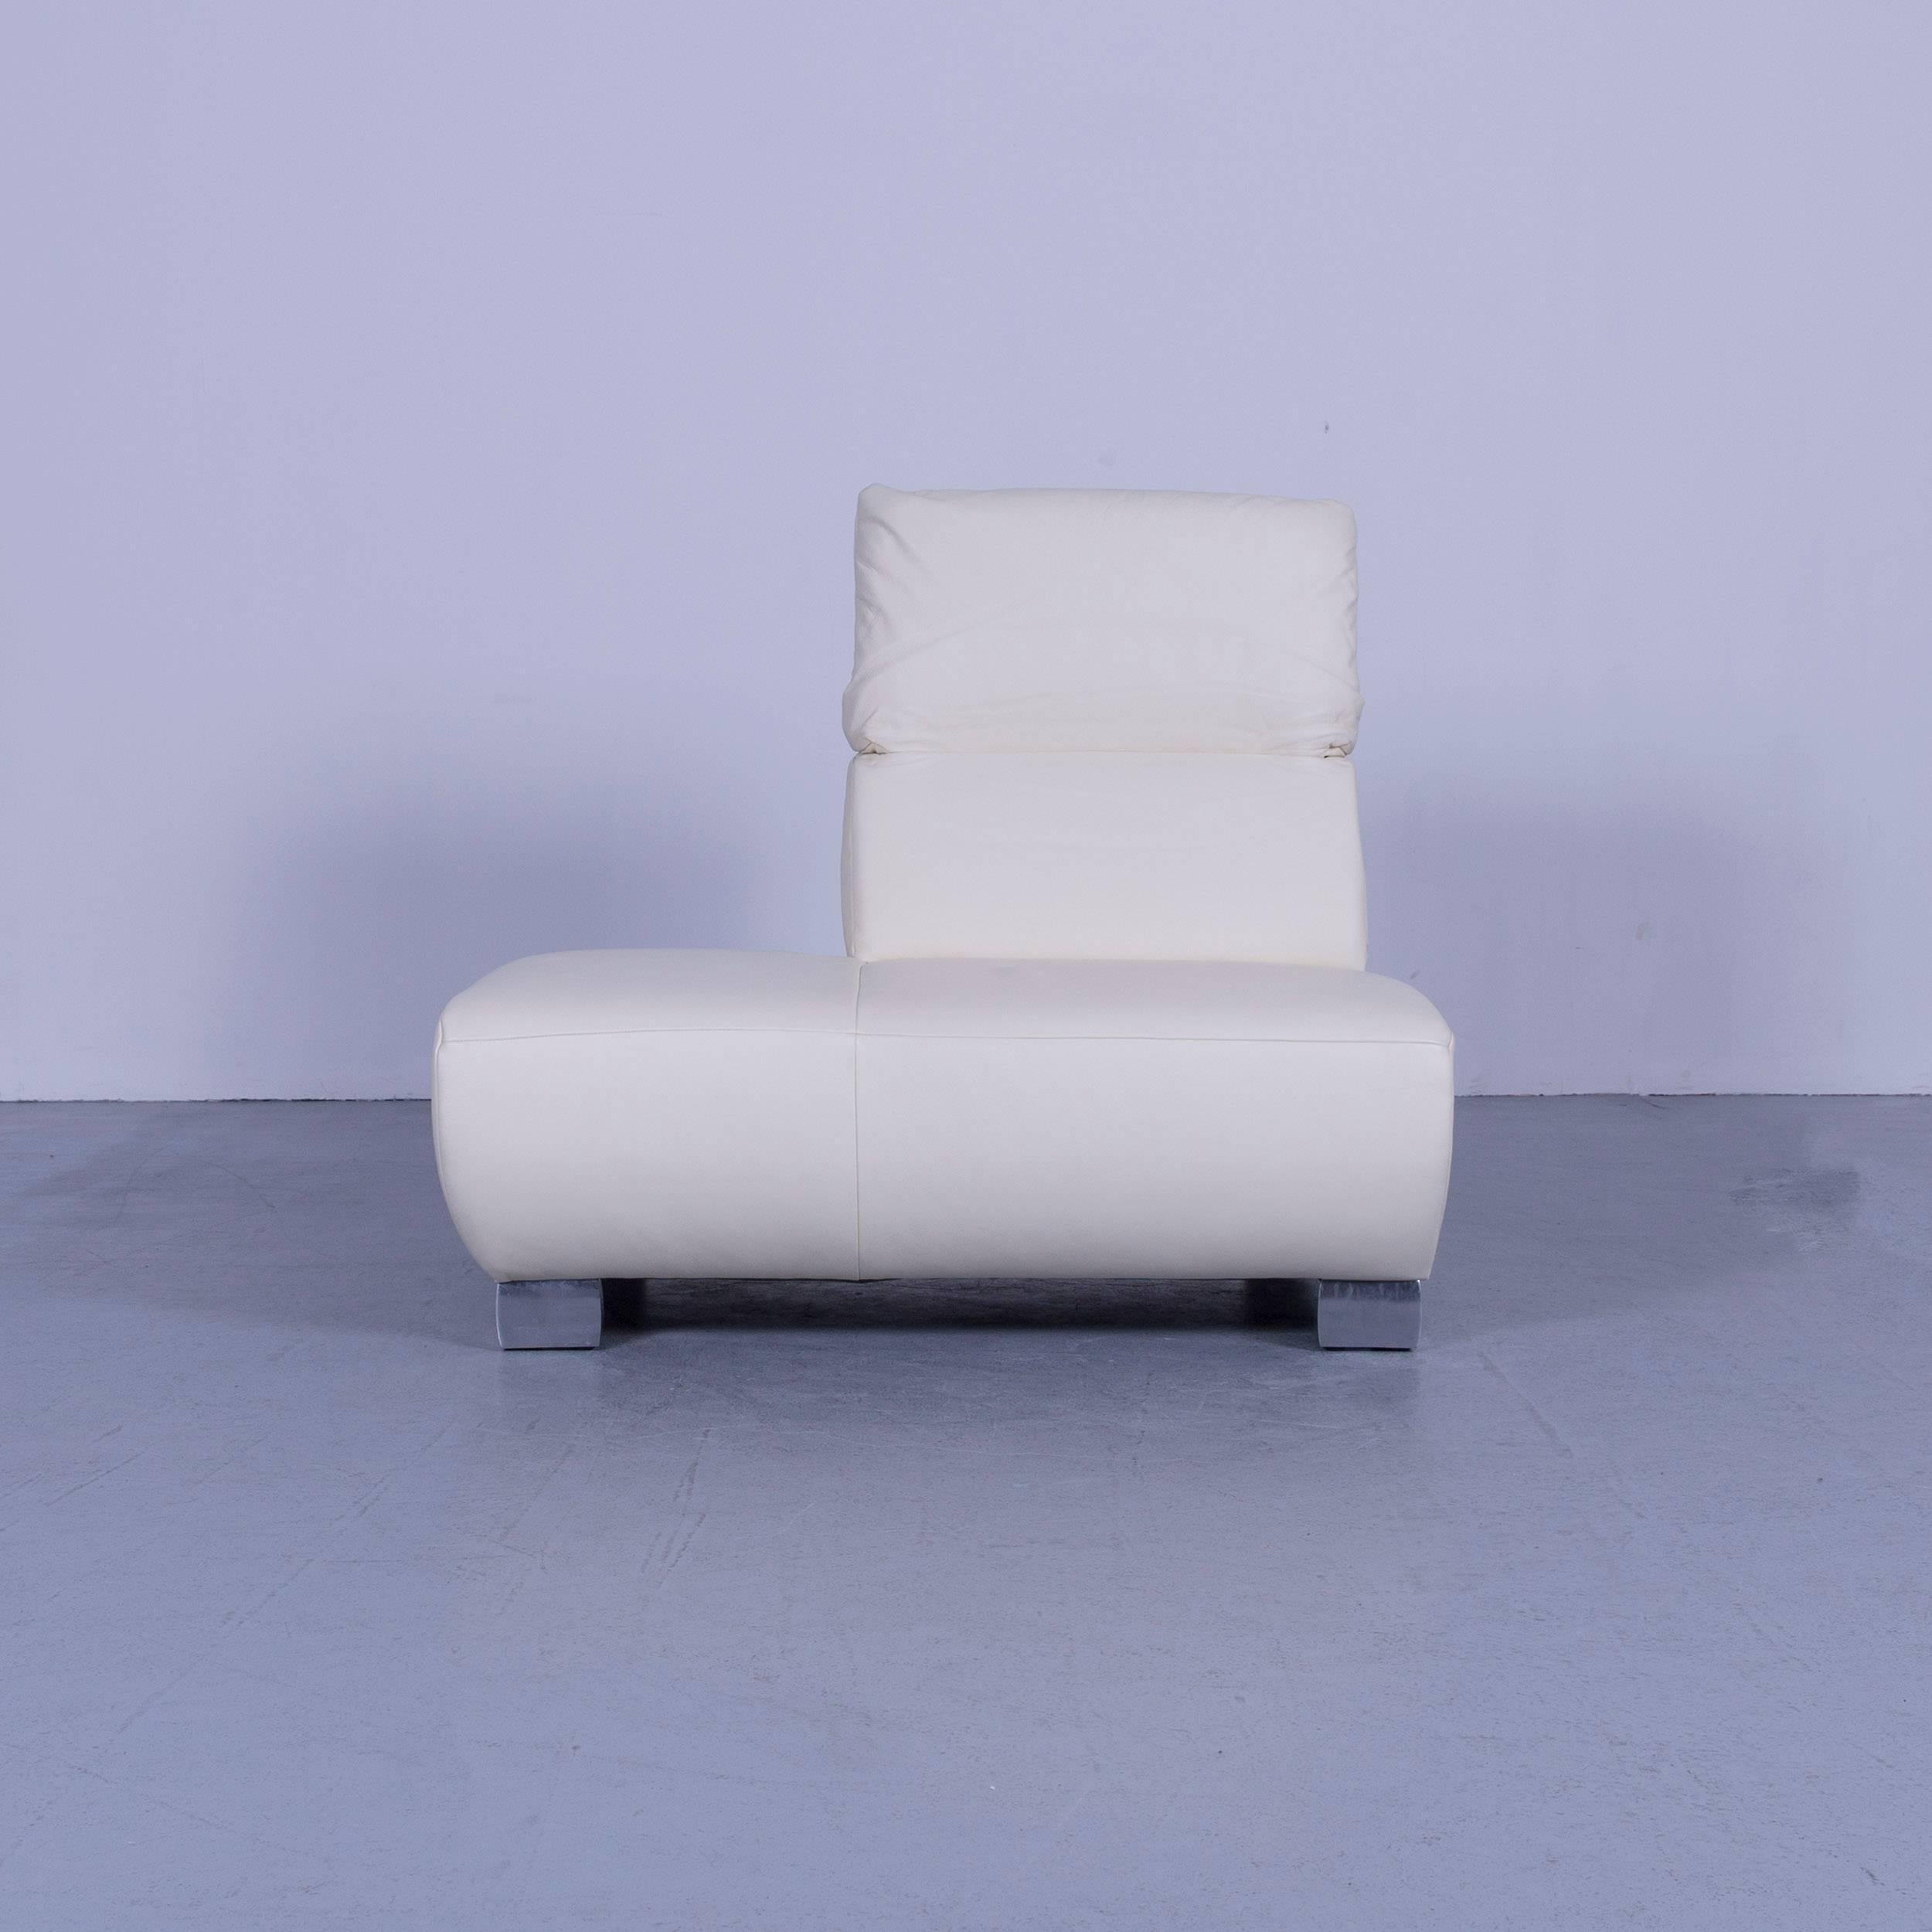 We offer delivery options to most destinations on earth. Find our shipping quotes at the bottom of this page in the shipping section.

We bring to you an Koinor Volare Leather Recamiere Off-White One Seat

Shipping:

An on point shipping process is